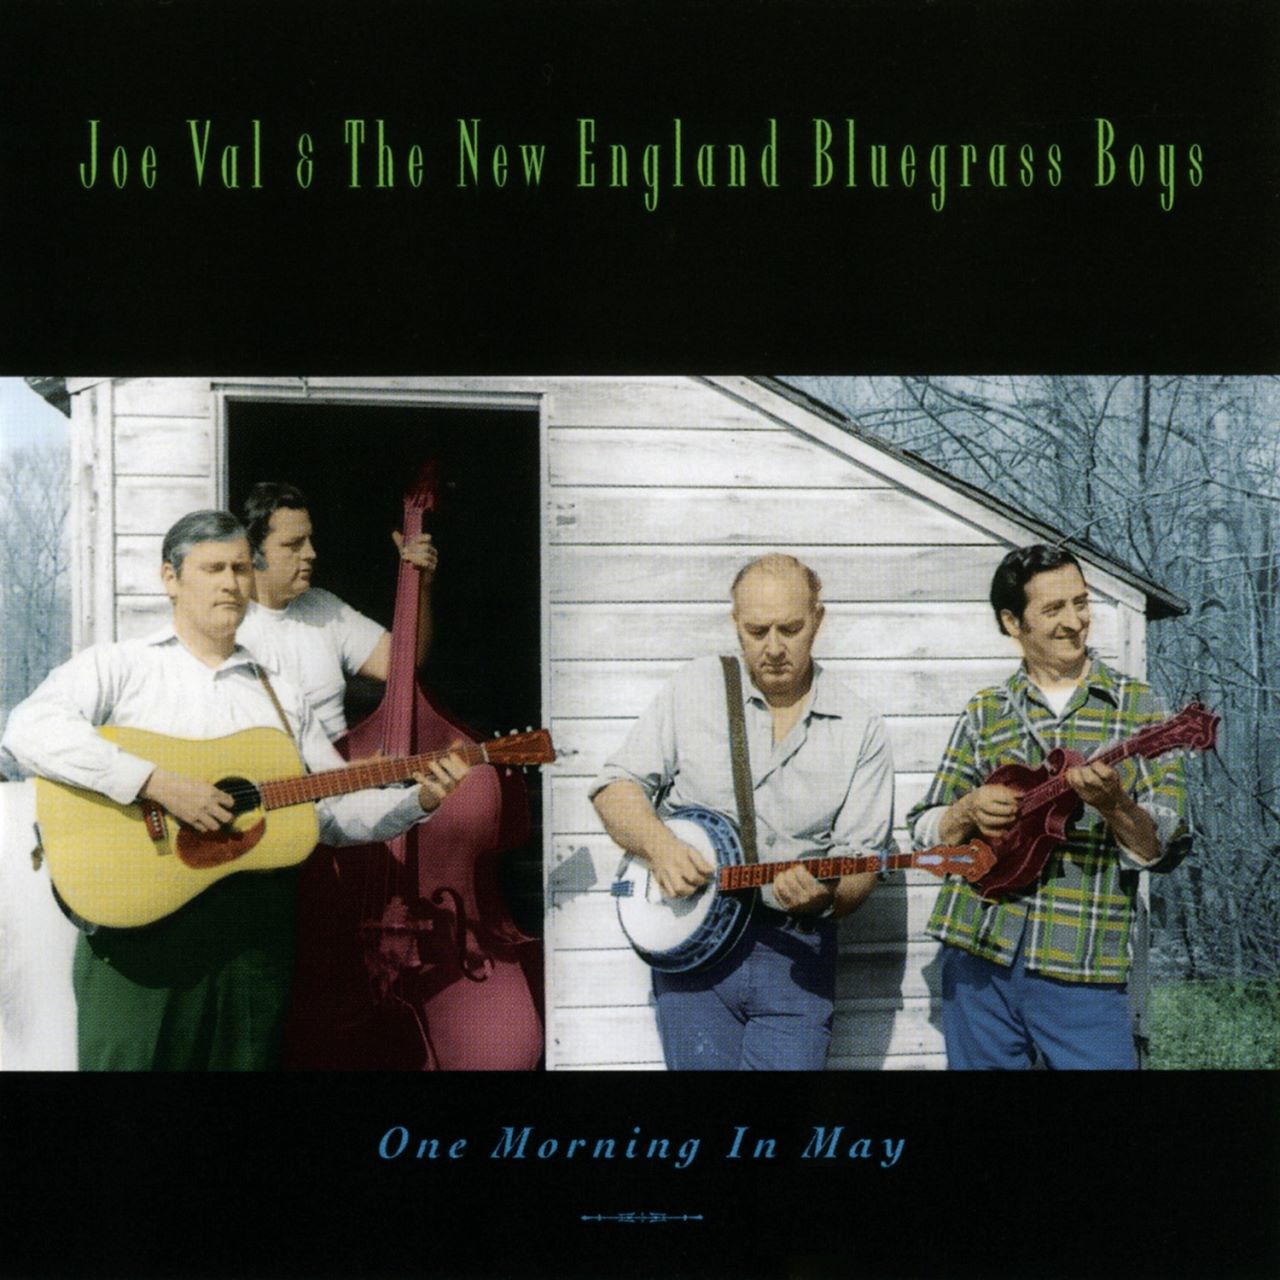 Joe Val & The New England Bluegrass Boys - One Morning In May cover album